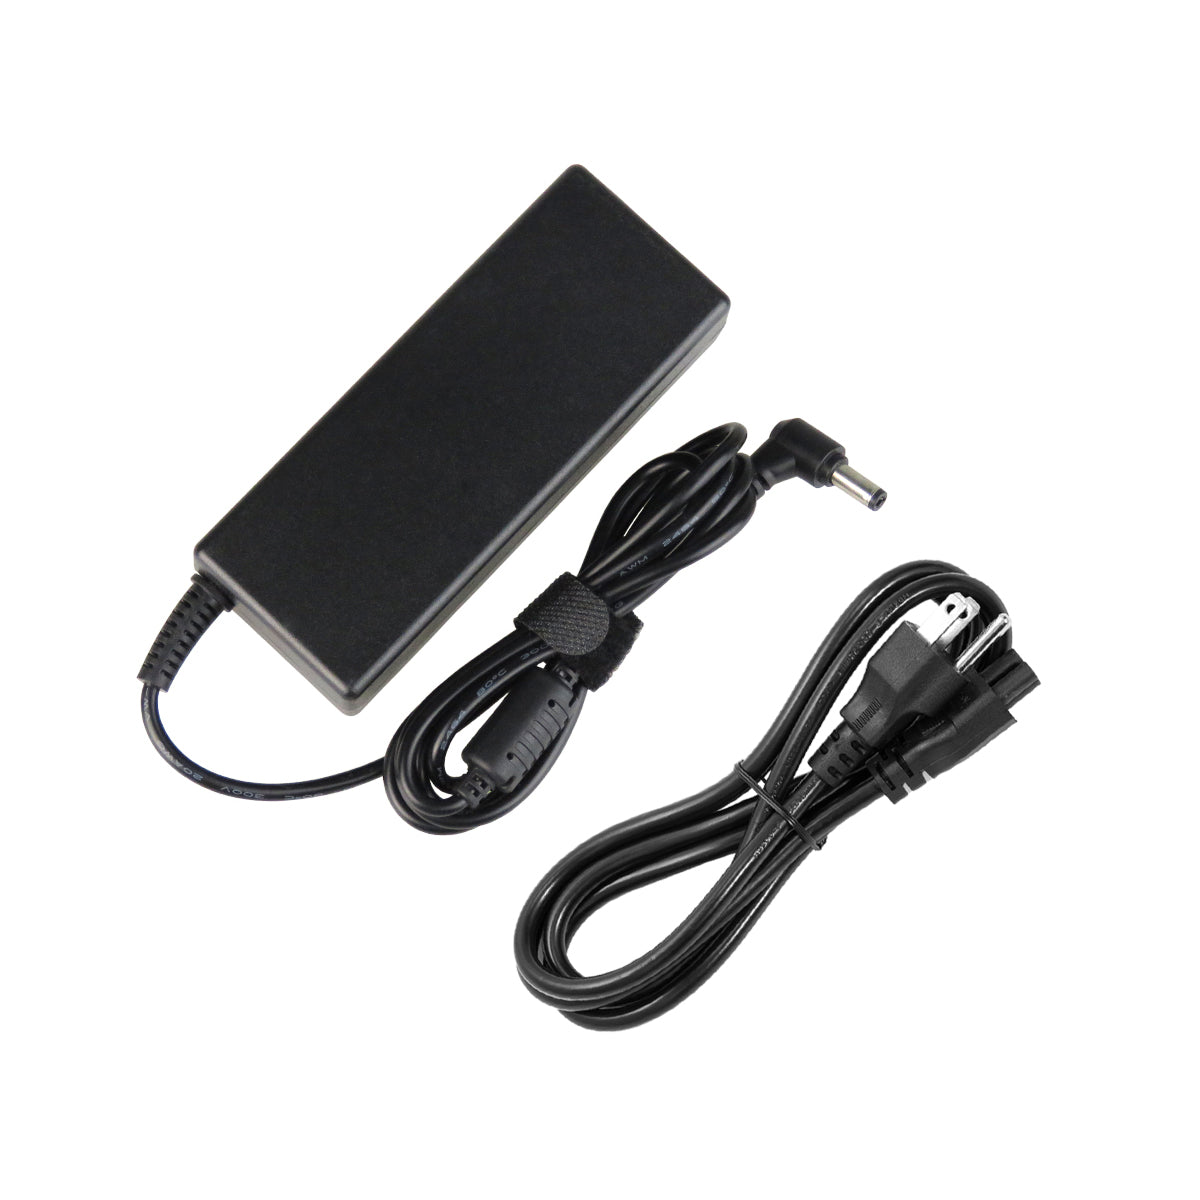 AC Adapter Charger for Gateway MX8530 Notebook.